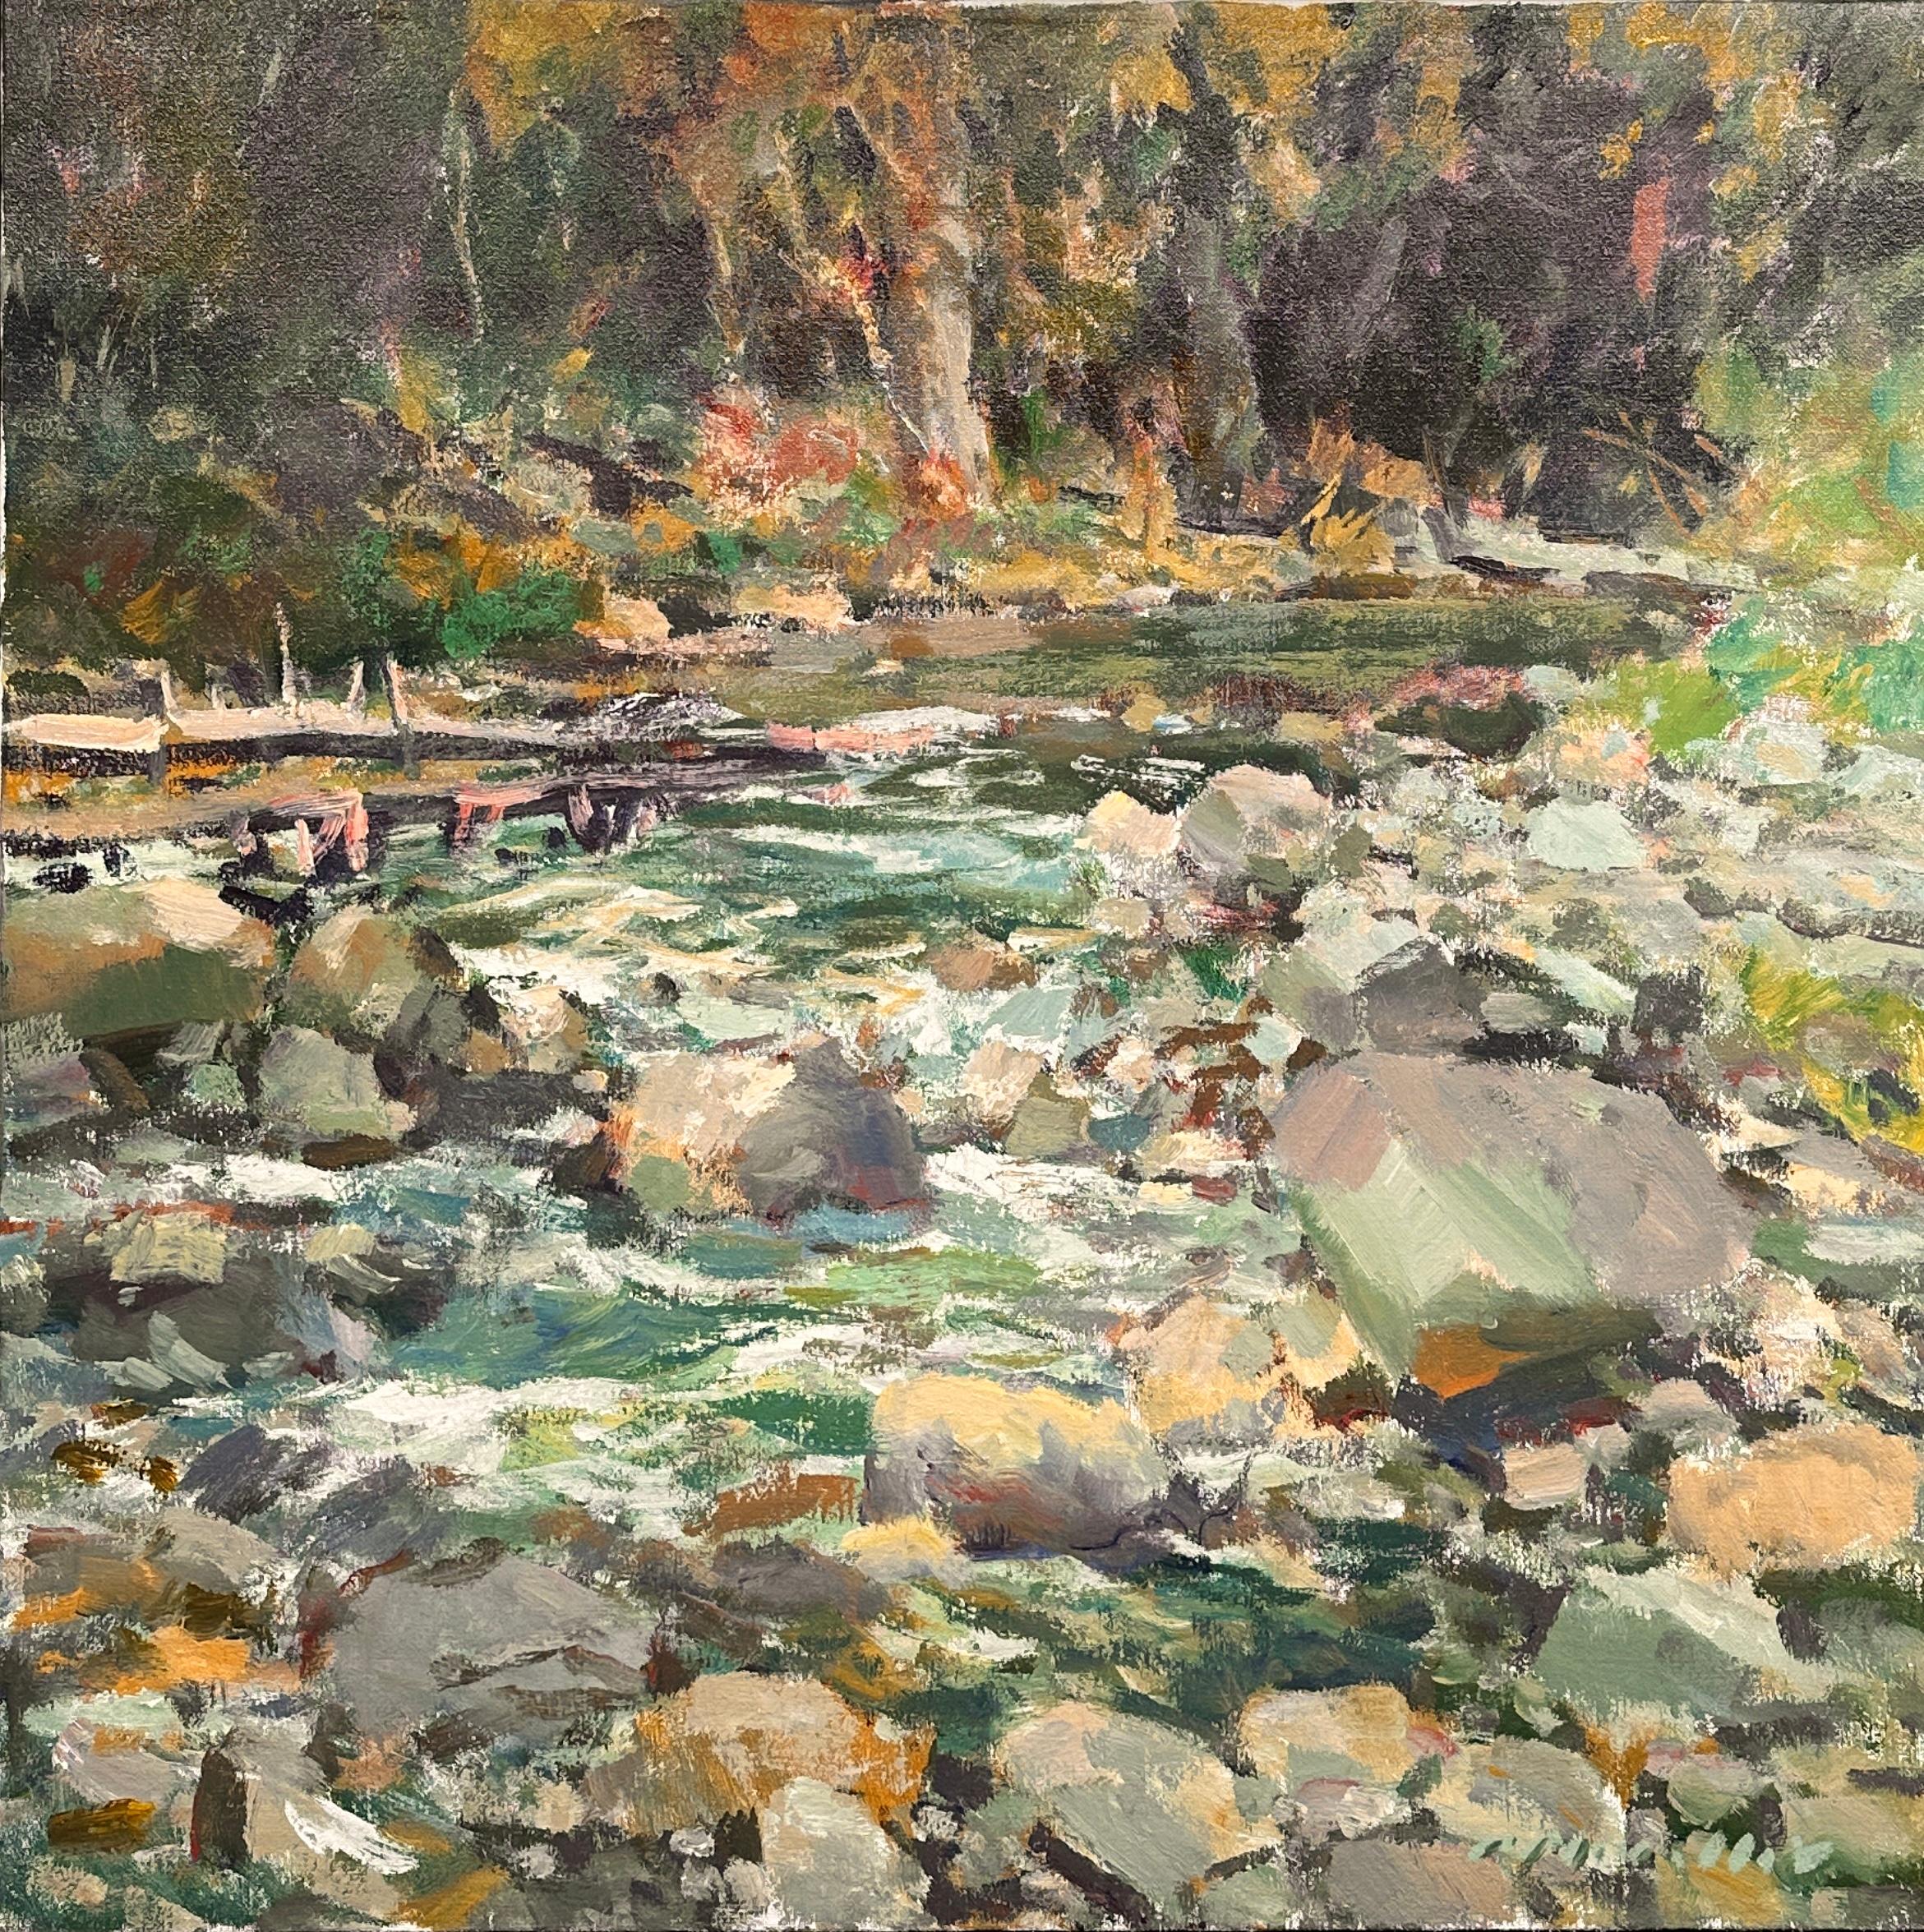 Artist Charles Movalli (1945-2016) "Mountain Stream" Landscape Painting